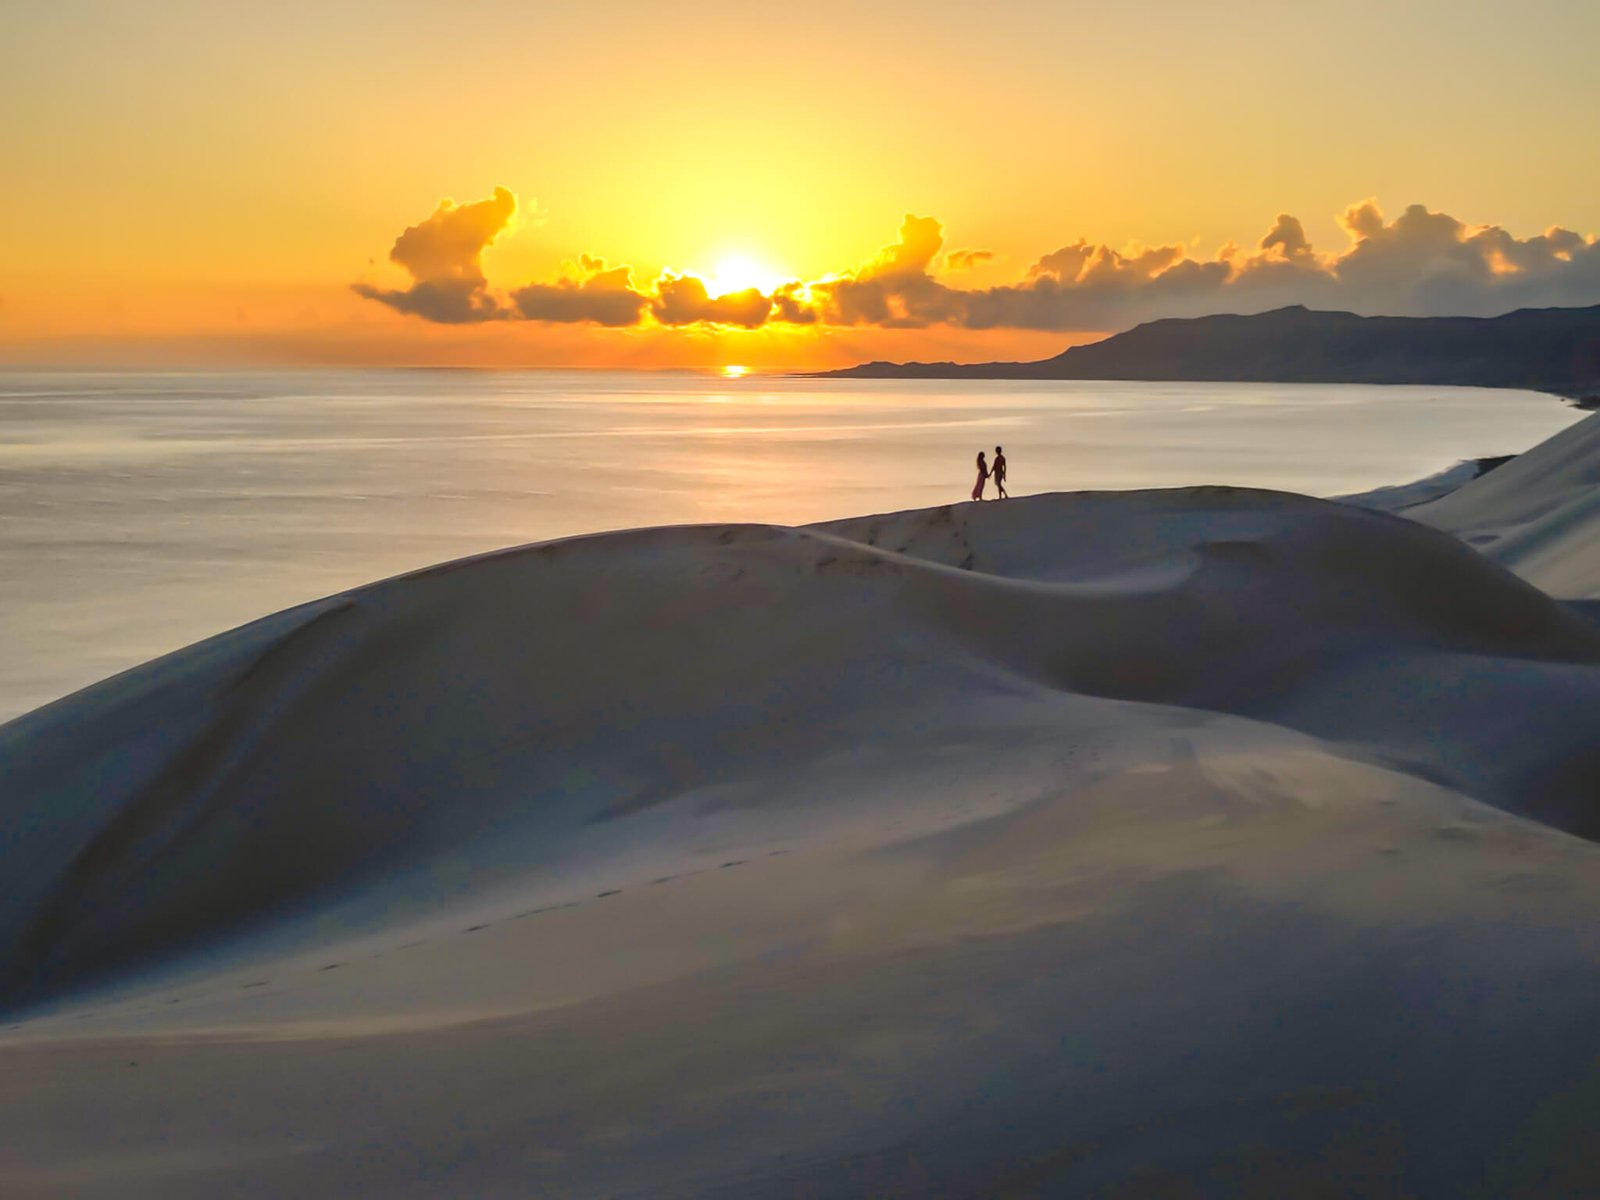 sunrise on the dunes in Socotra